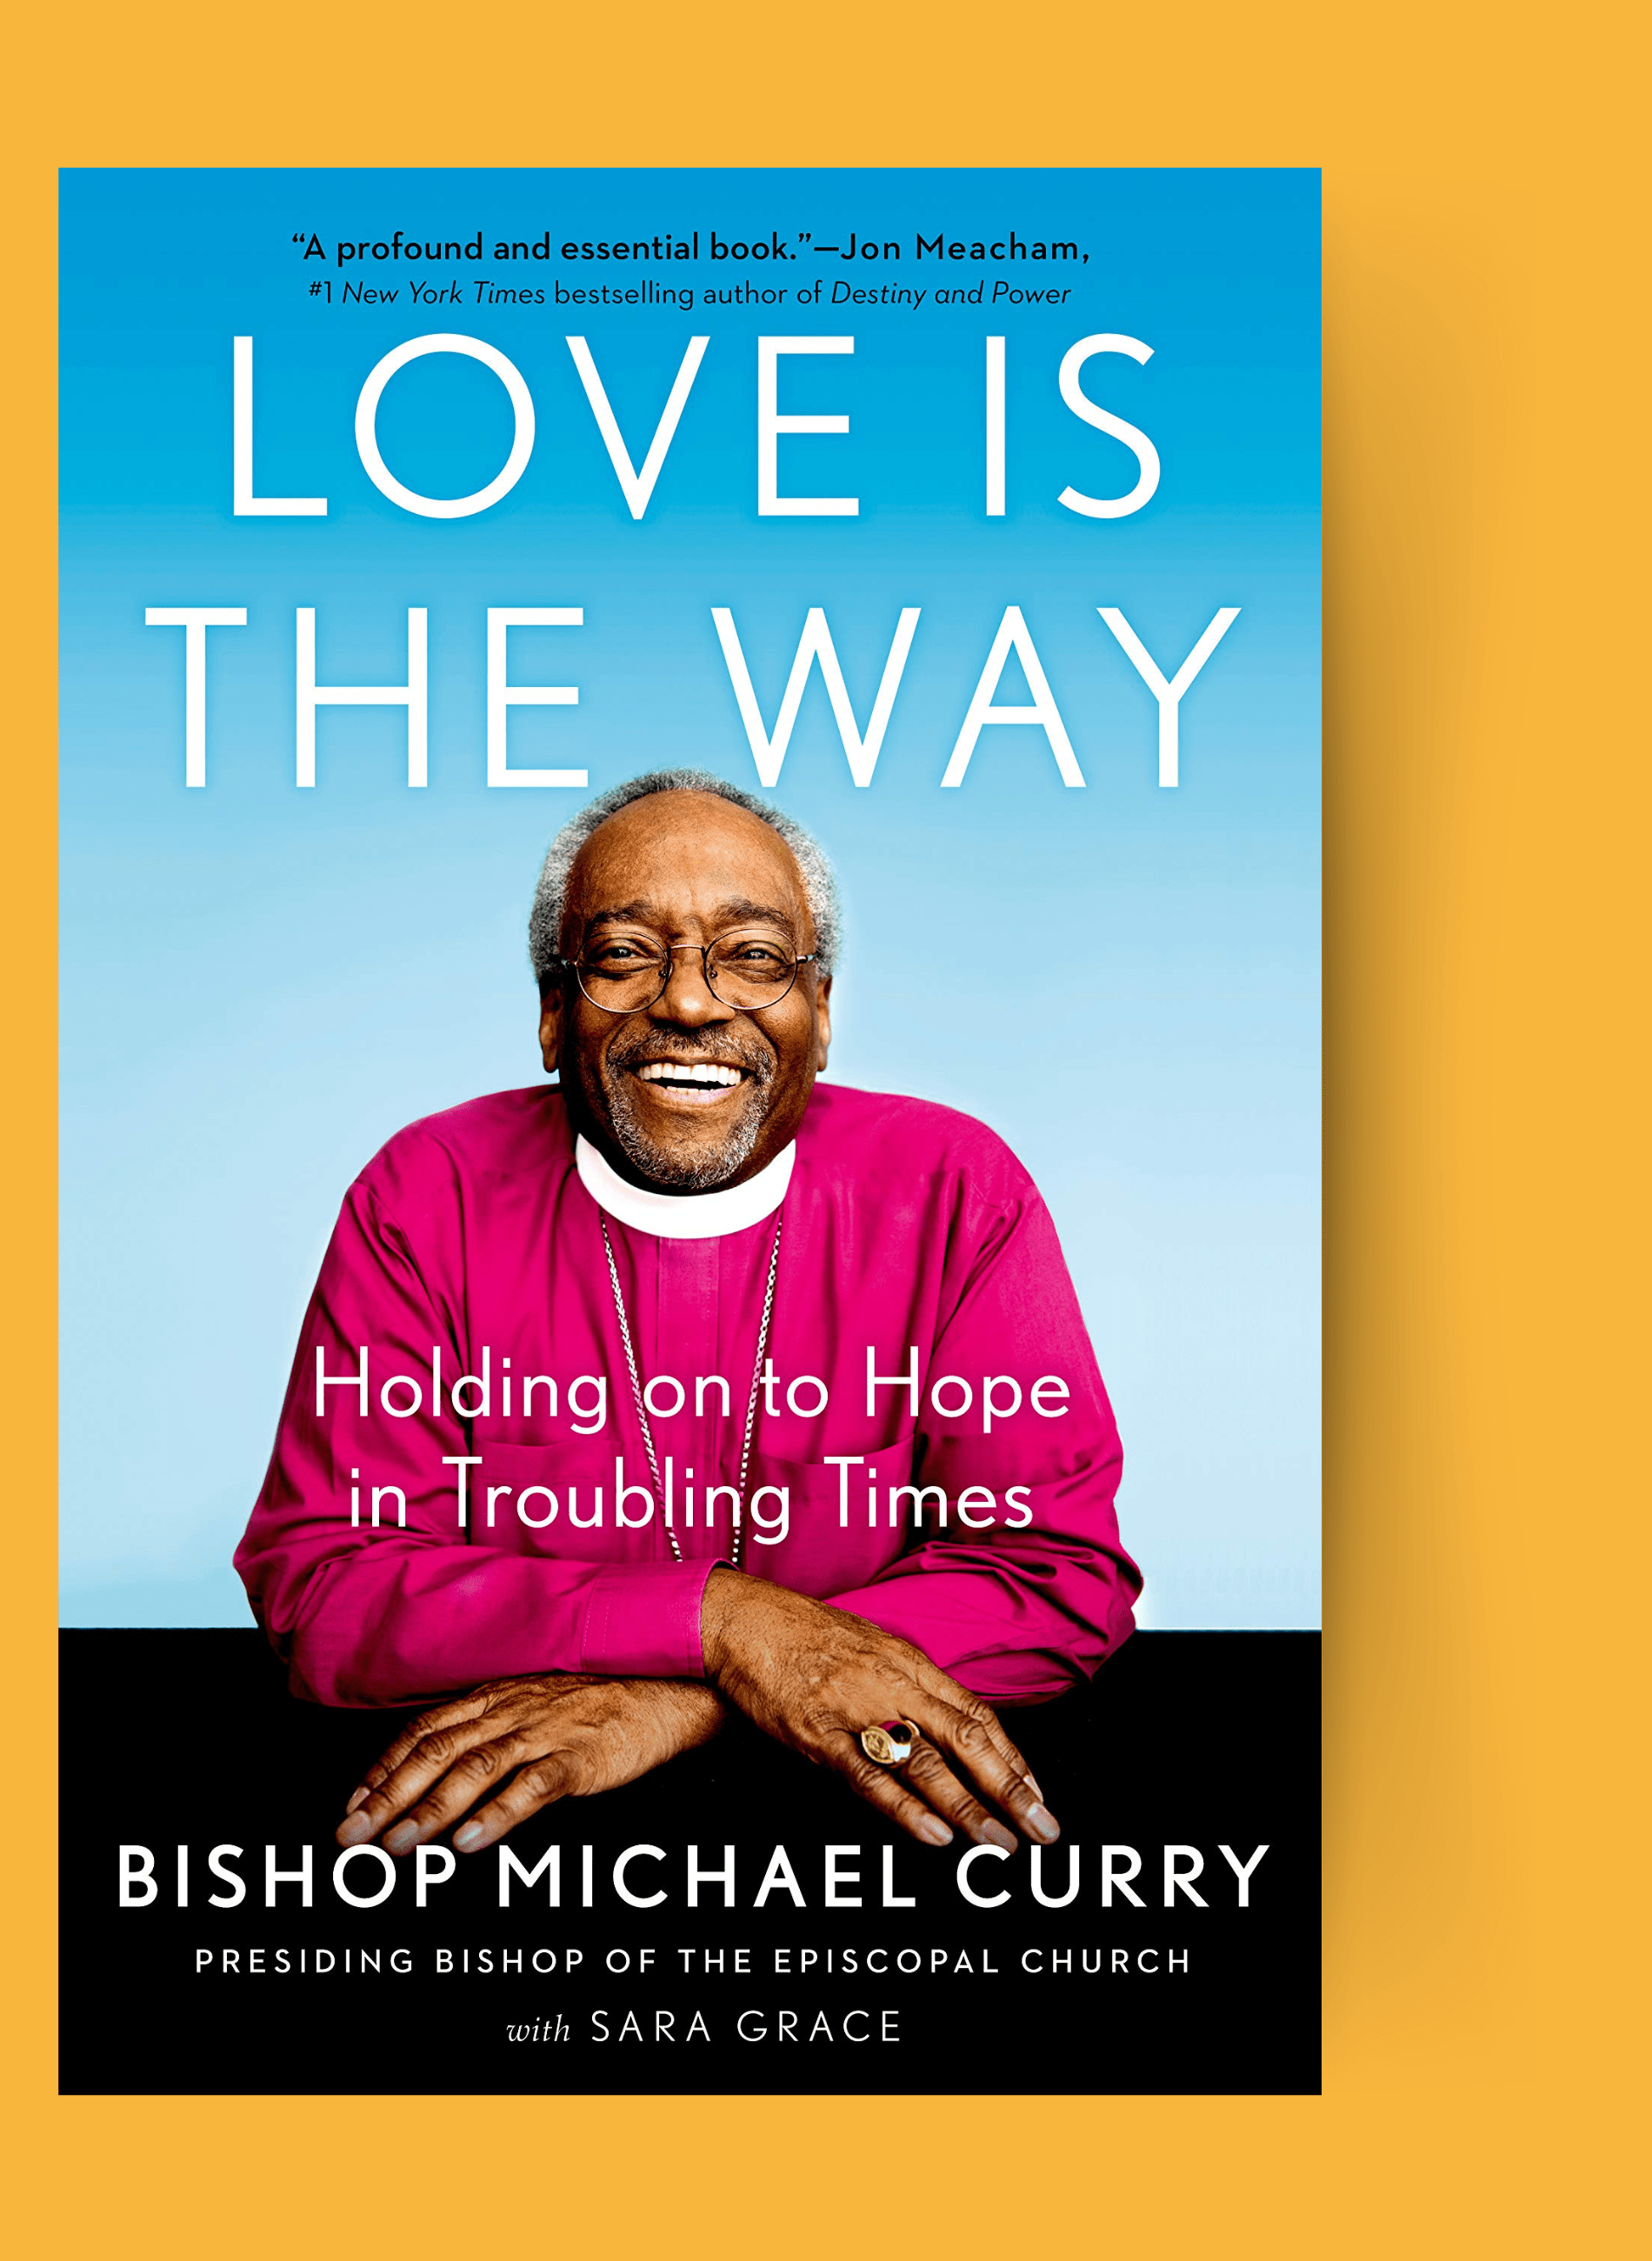 Picture of the book "Love is The Way" By Bishop Michael Curry